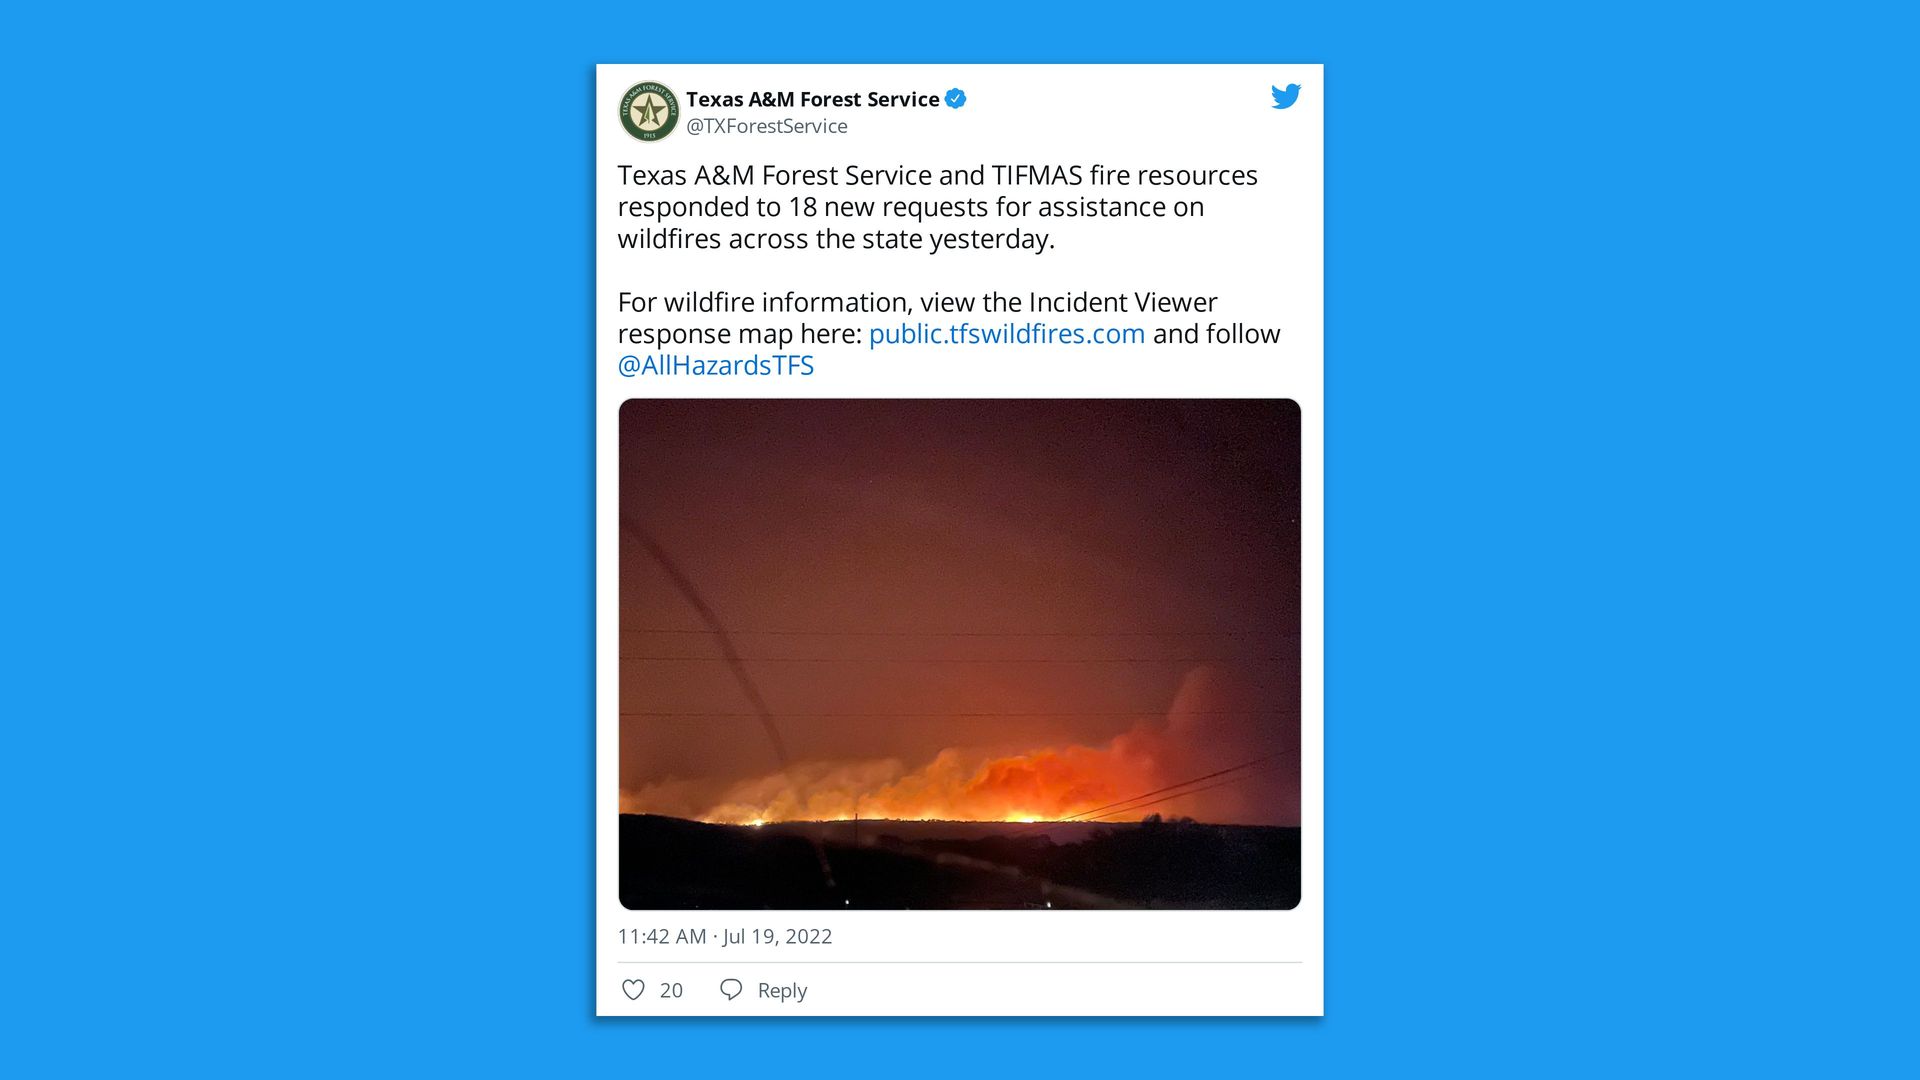 Tweet about wildfires across Texas